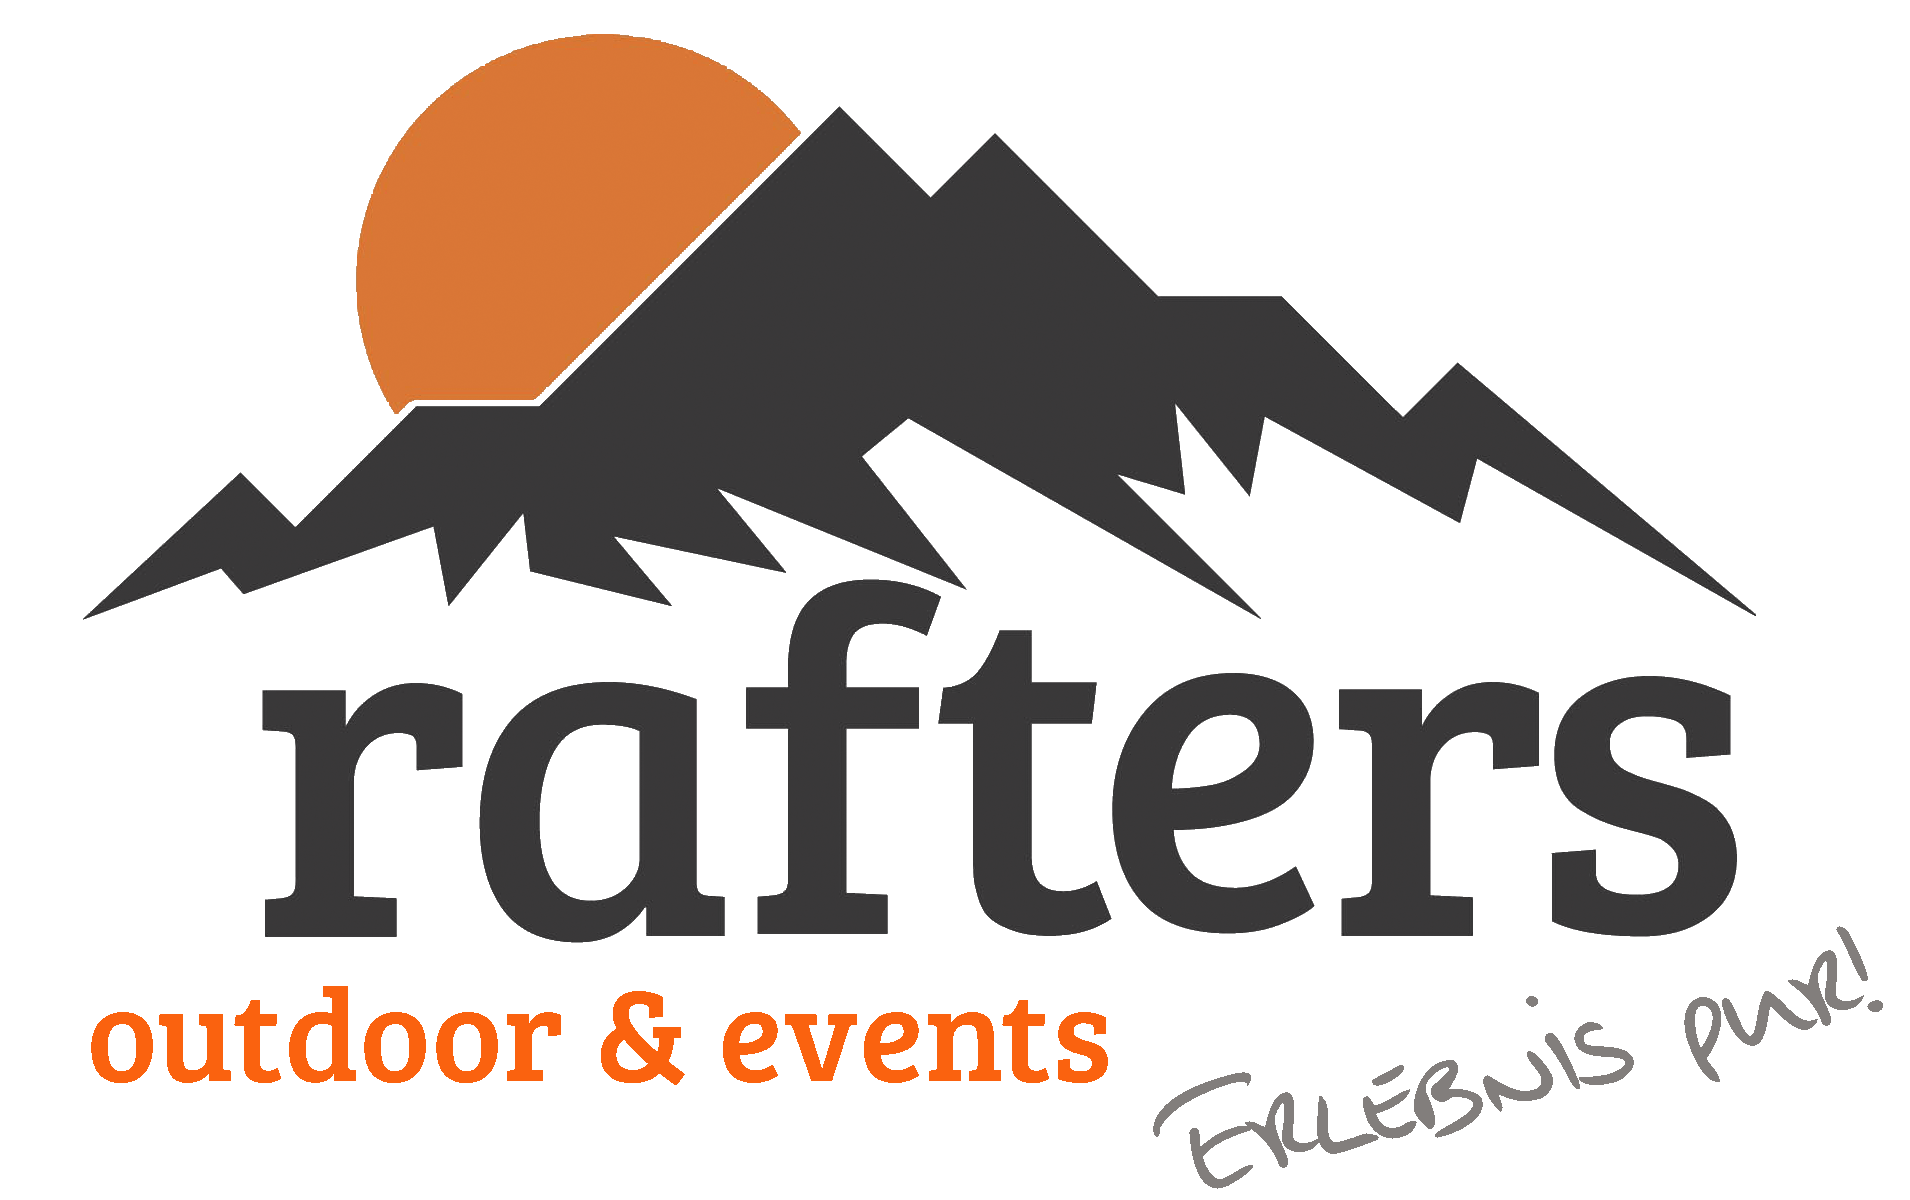 Rafters GmbH